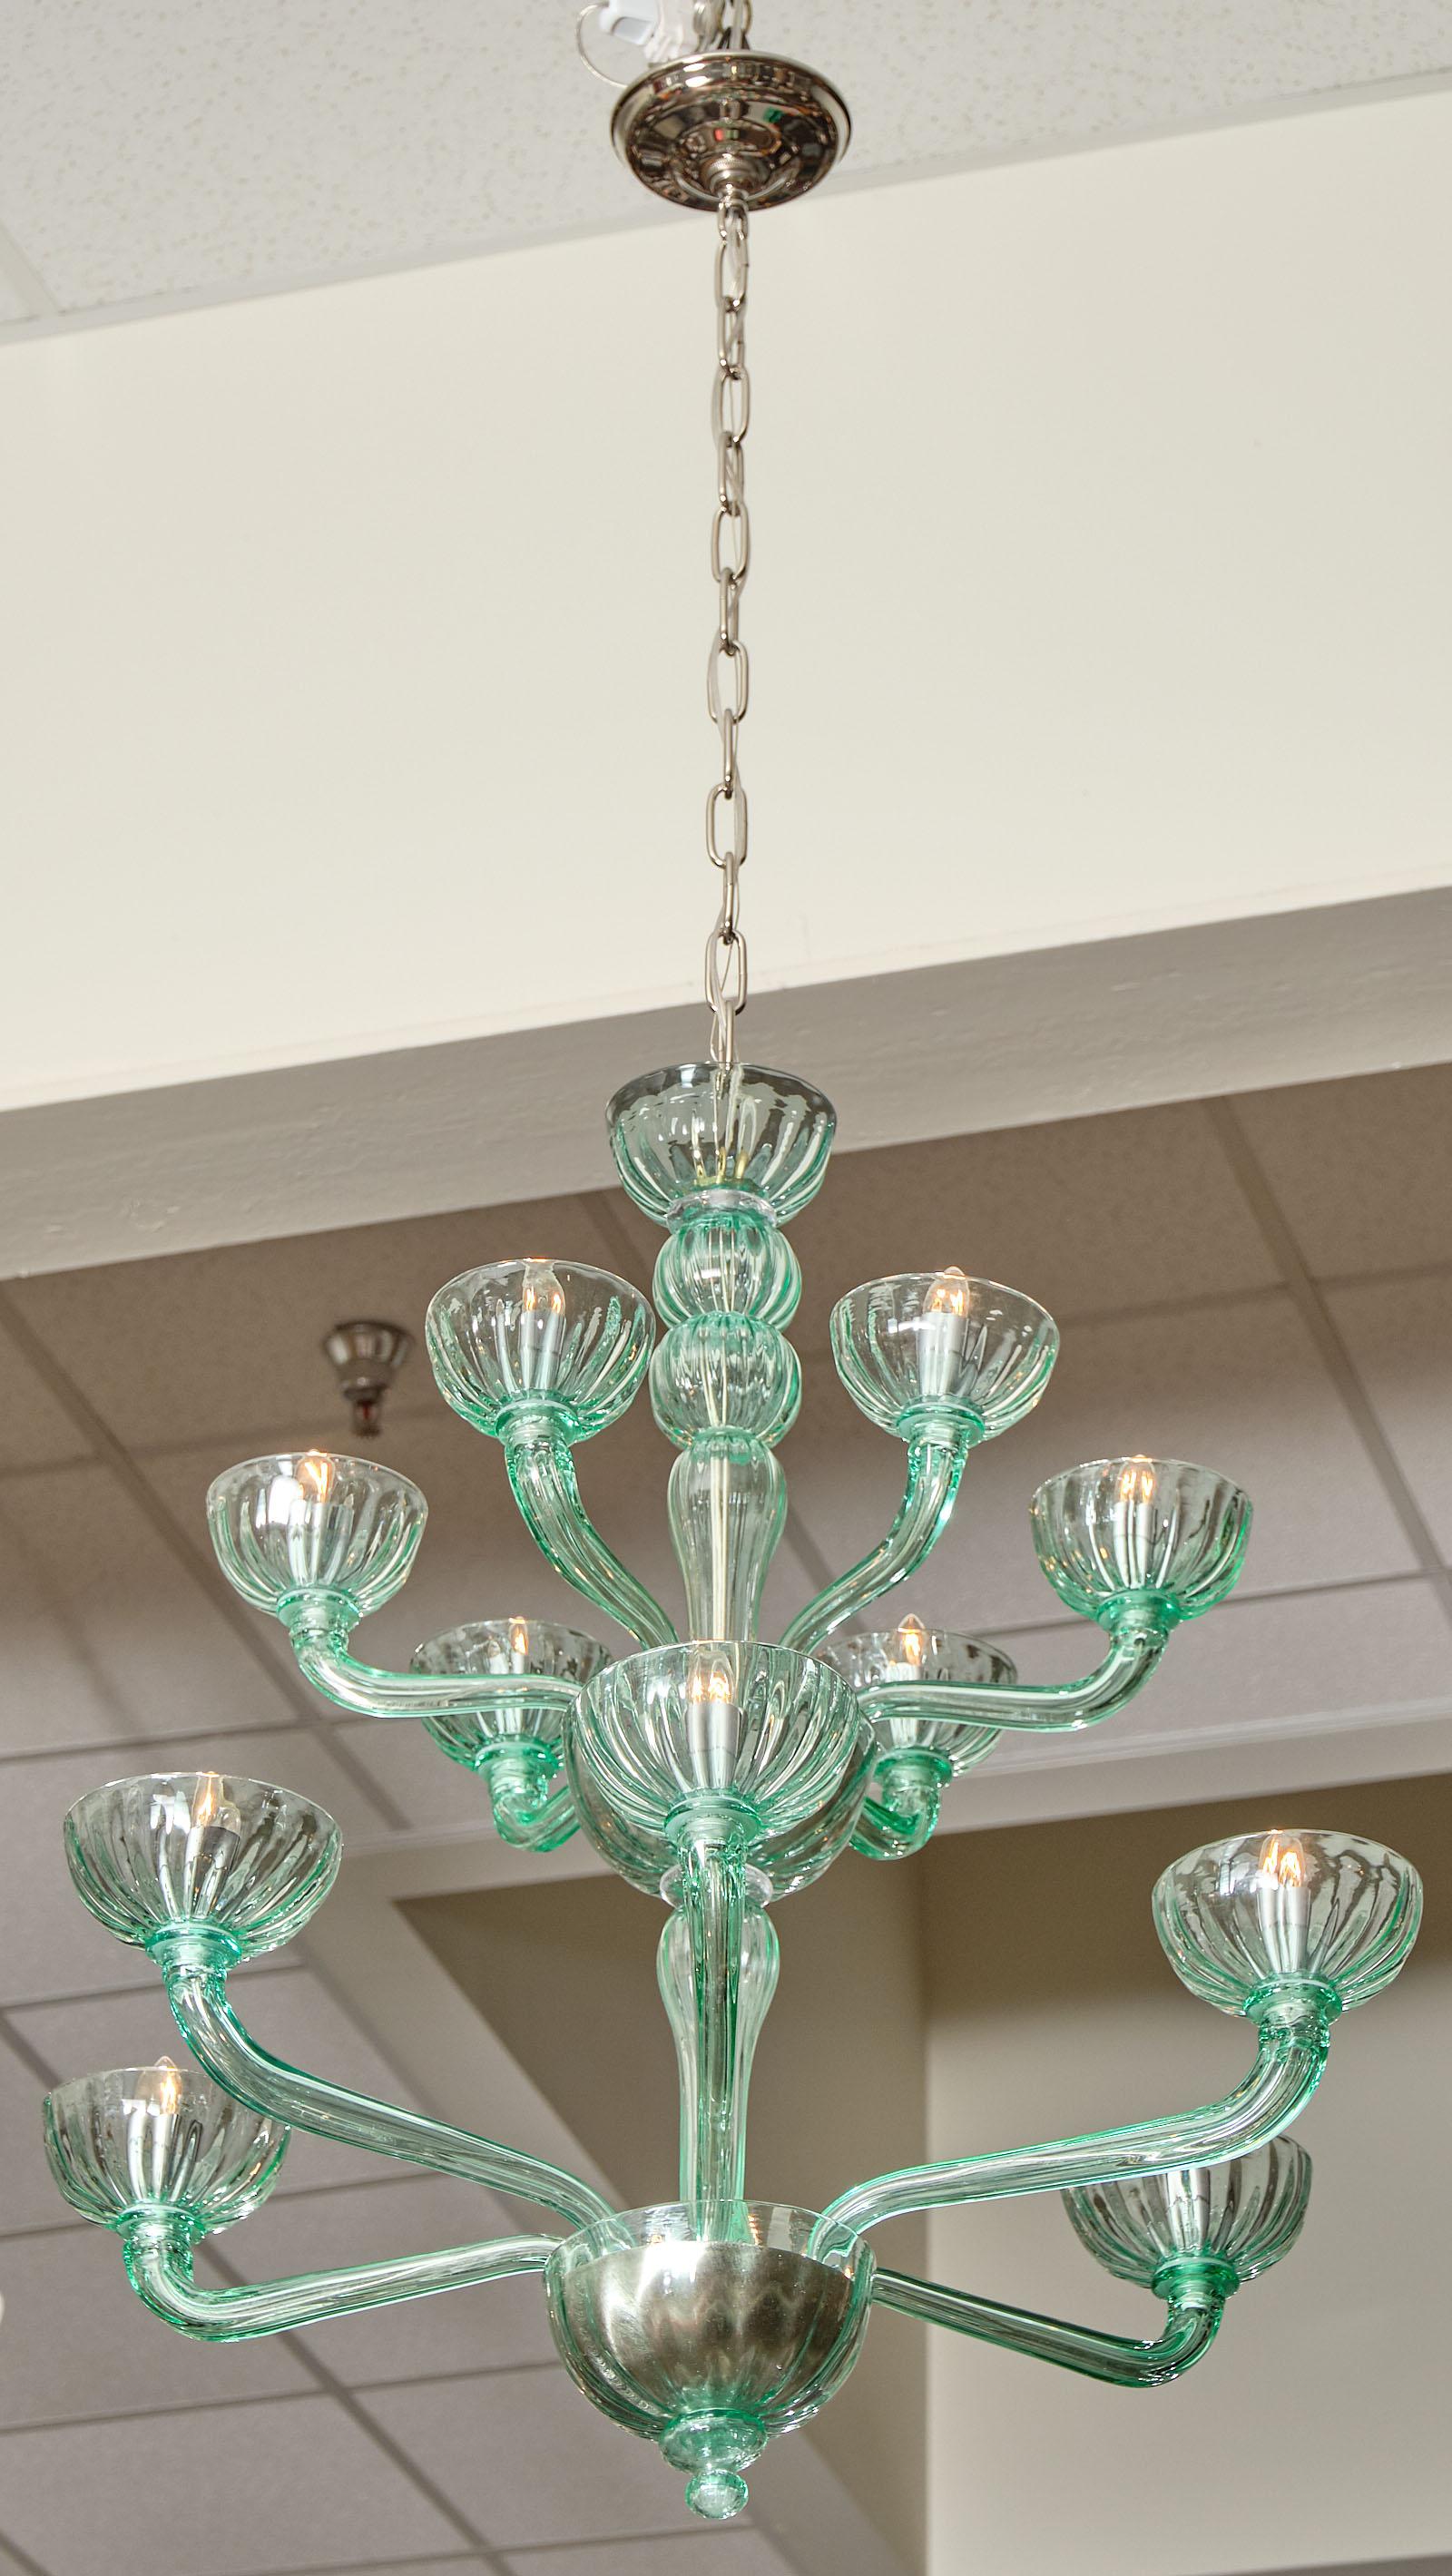 Murano glass mint colored two-tiered chandelier from Italy. We love the pastel color of this lovely piece and the Classic design. It has been newly wired to fit US standards.